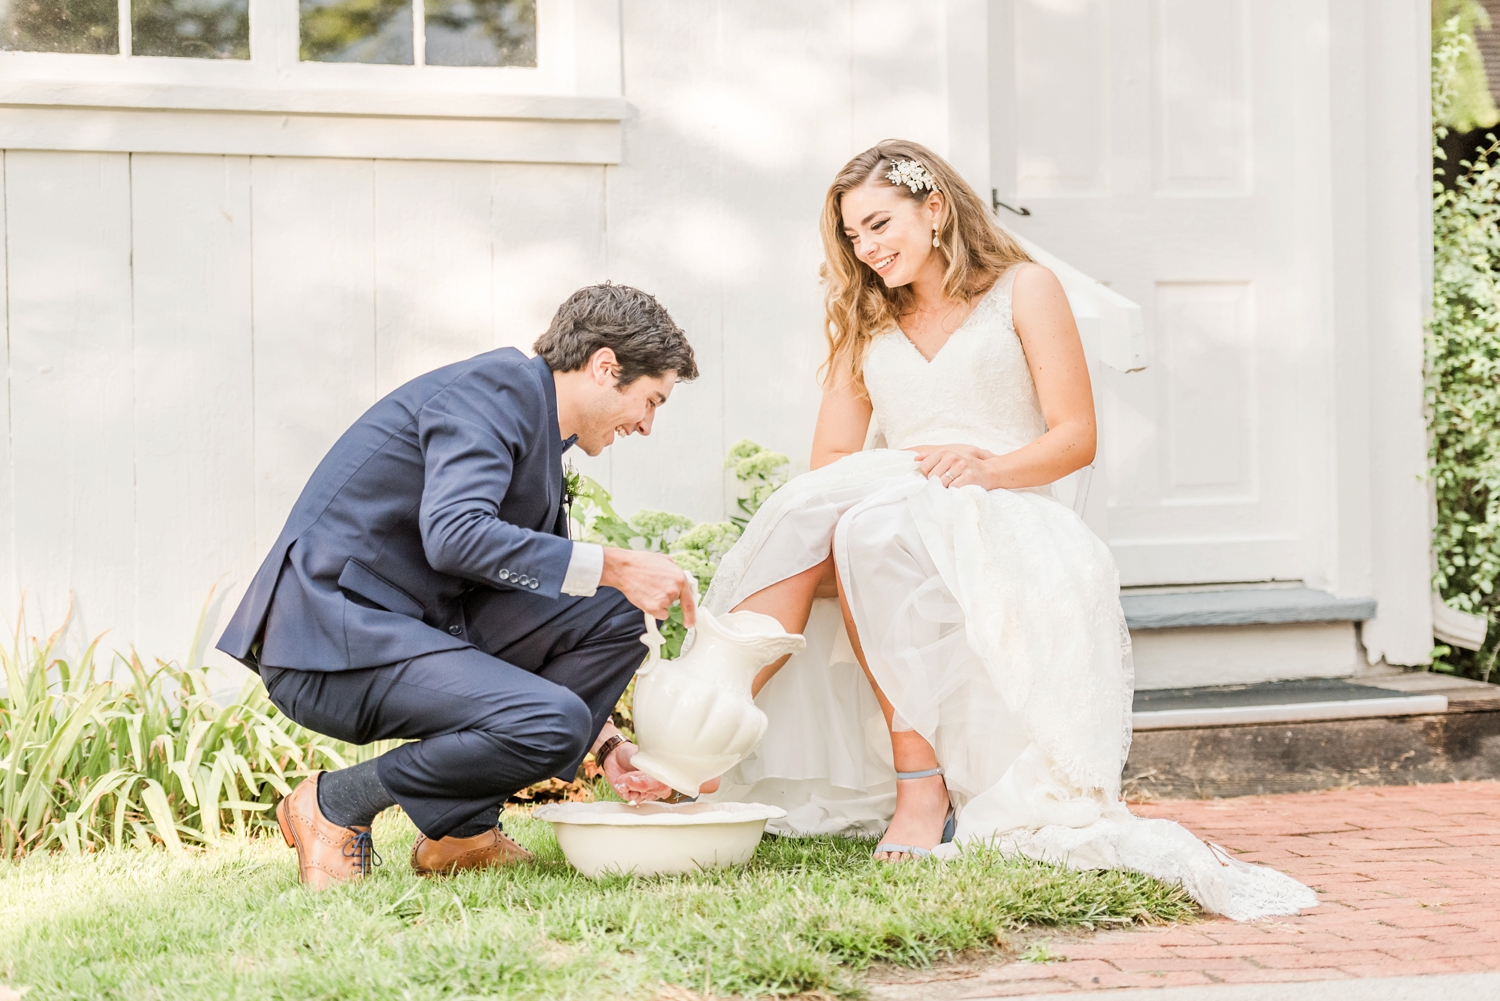 wedding-ceremony-foot-washing-with-the-bride-and-groom